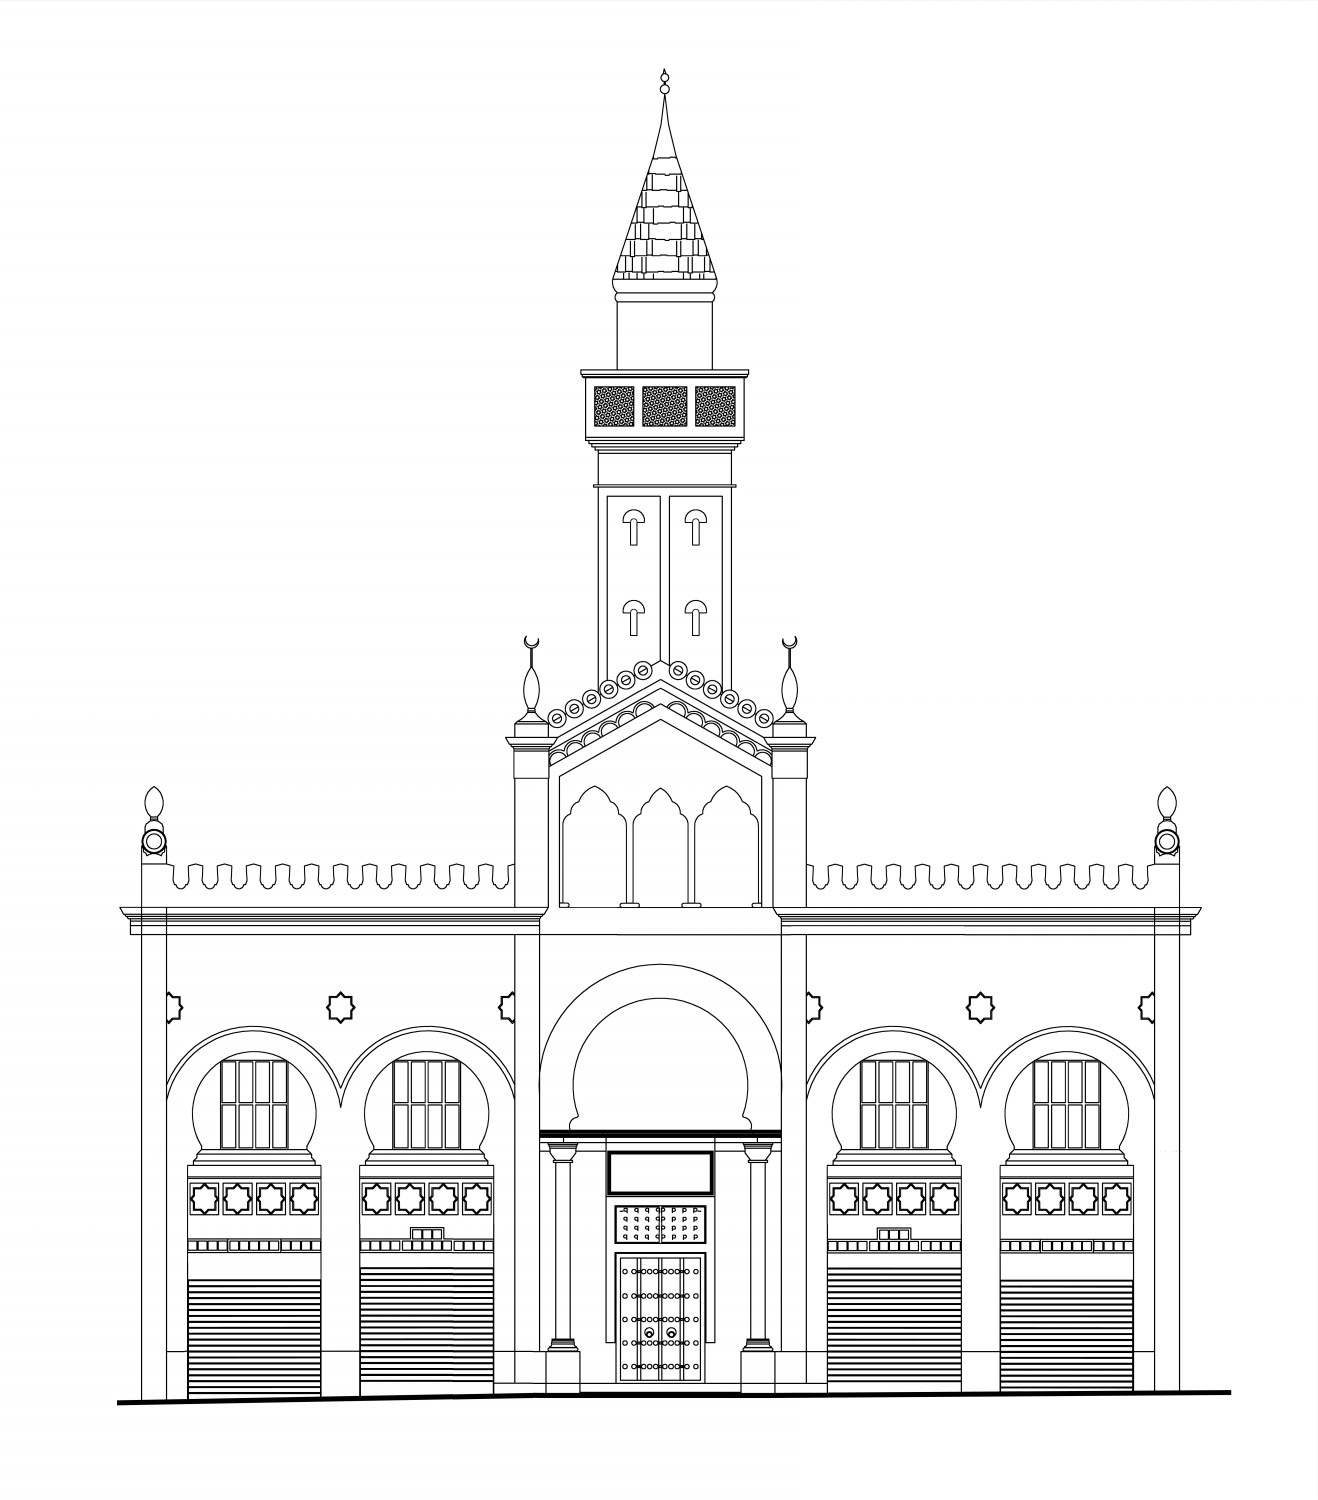 Street elevation of the mosque